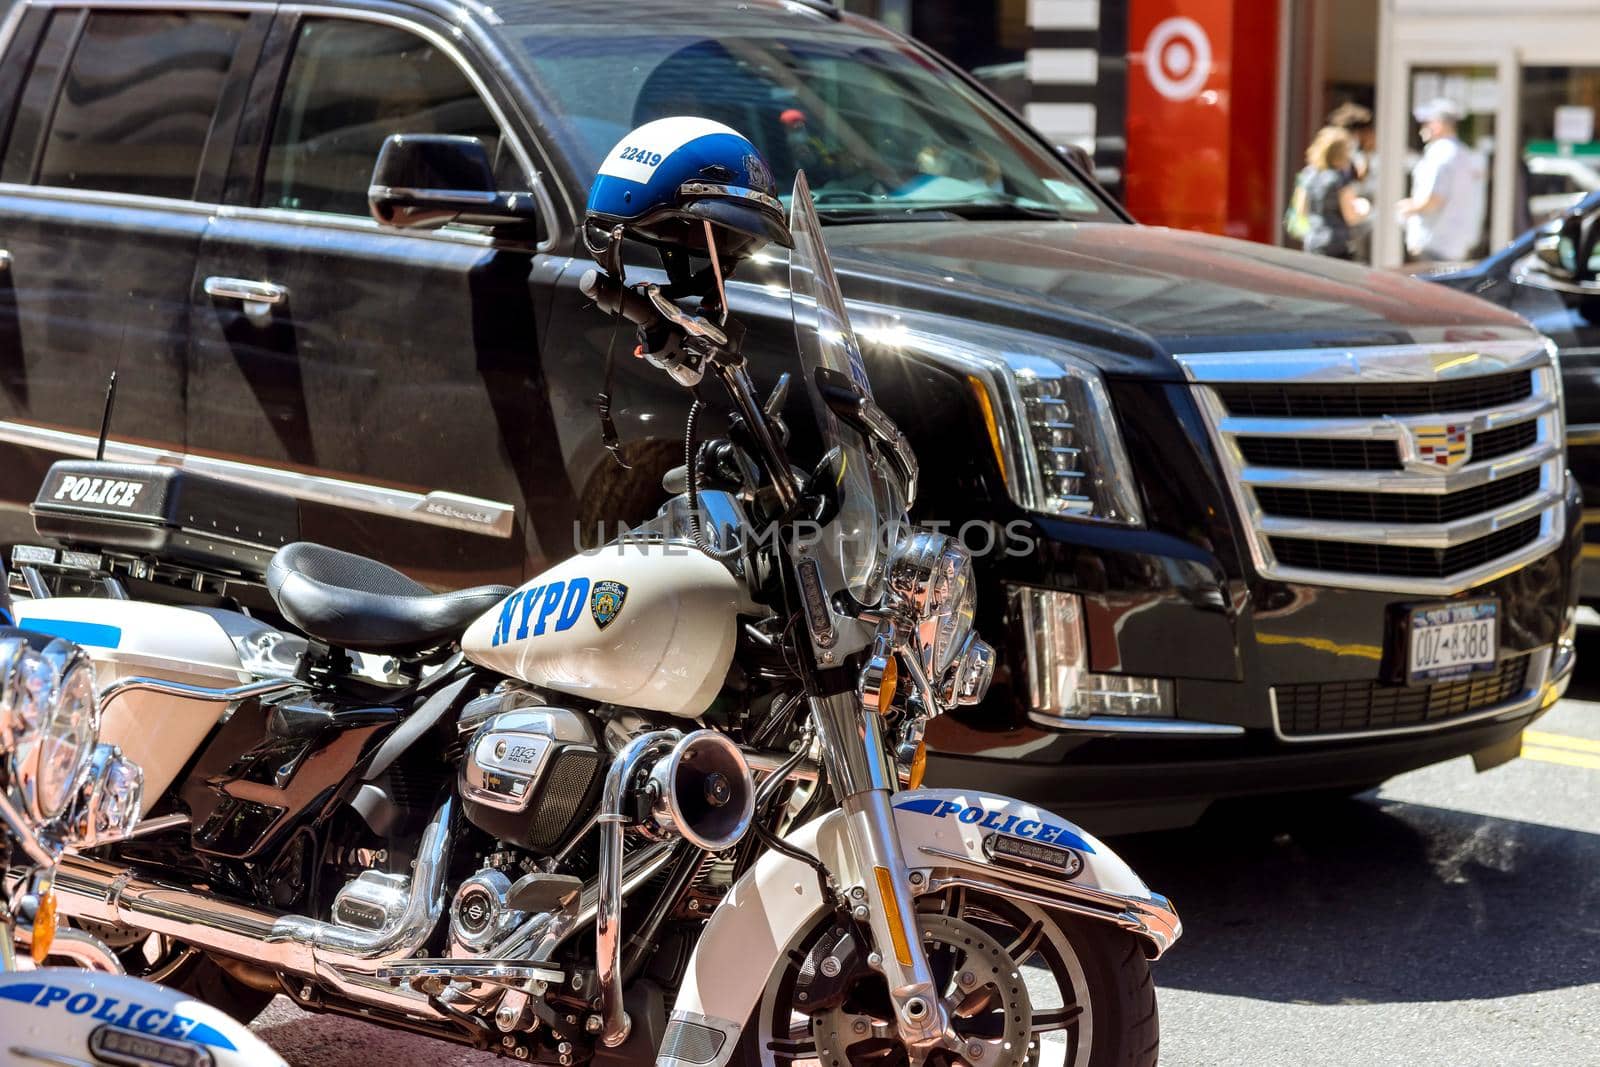 18 June 2021 New York, USA: NYPD highway motorcycles helmet on motorcycles with police New York City